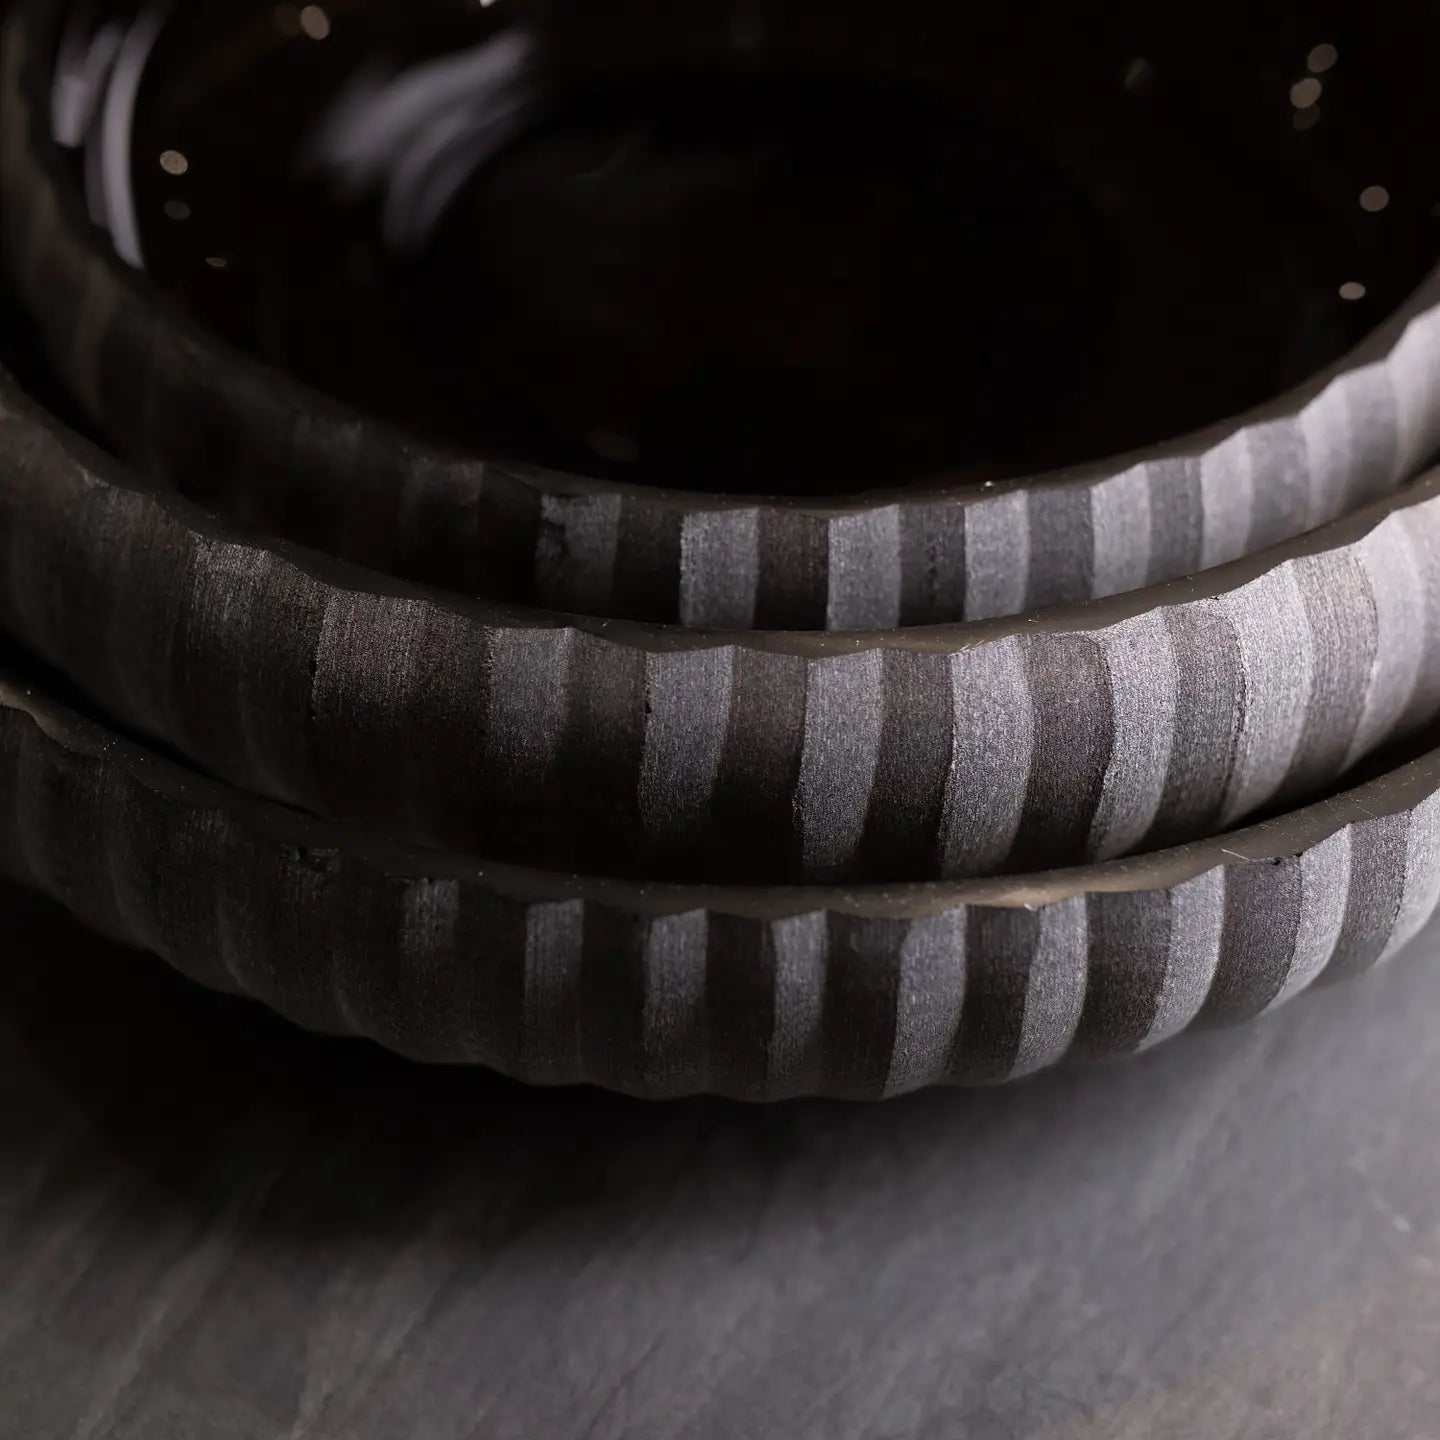 Fluted Brown Bowl